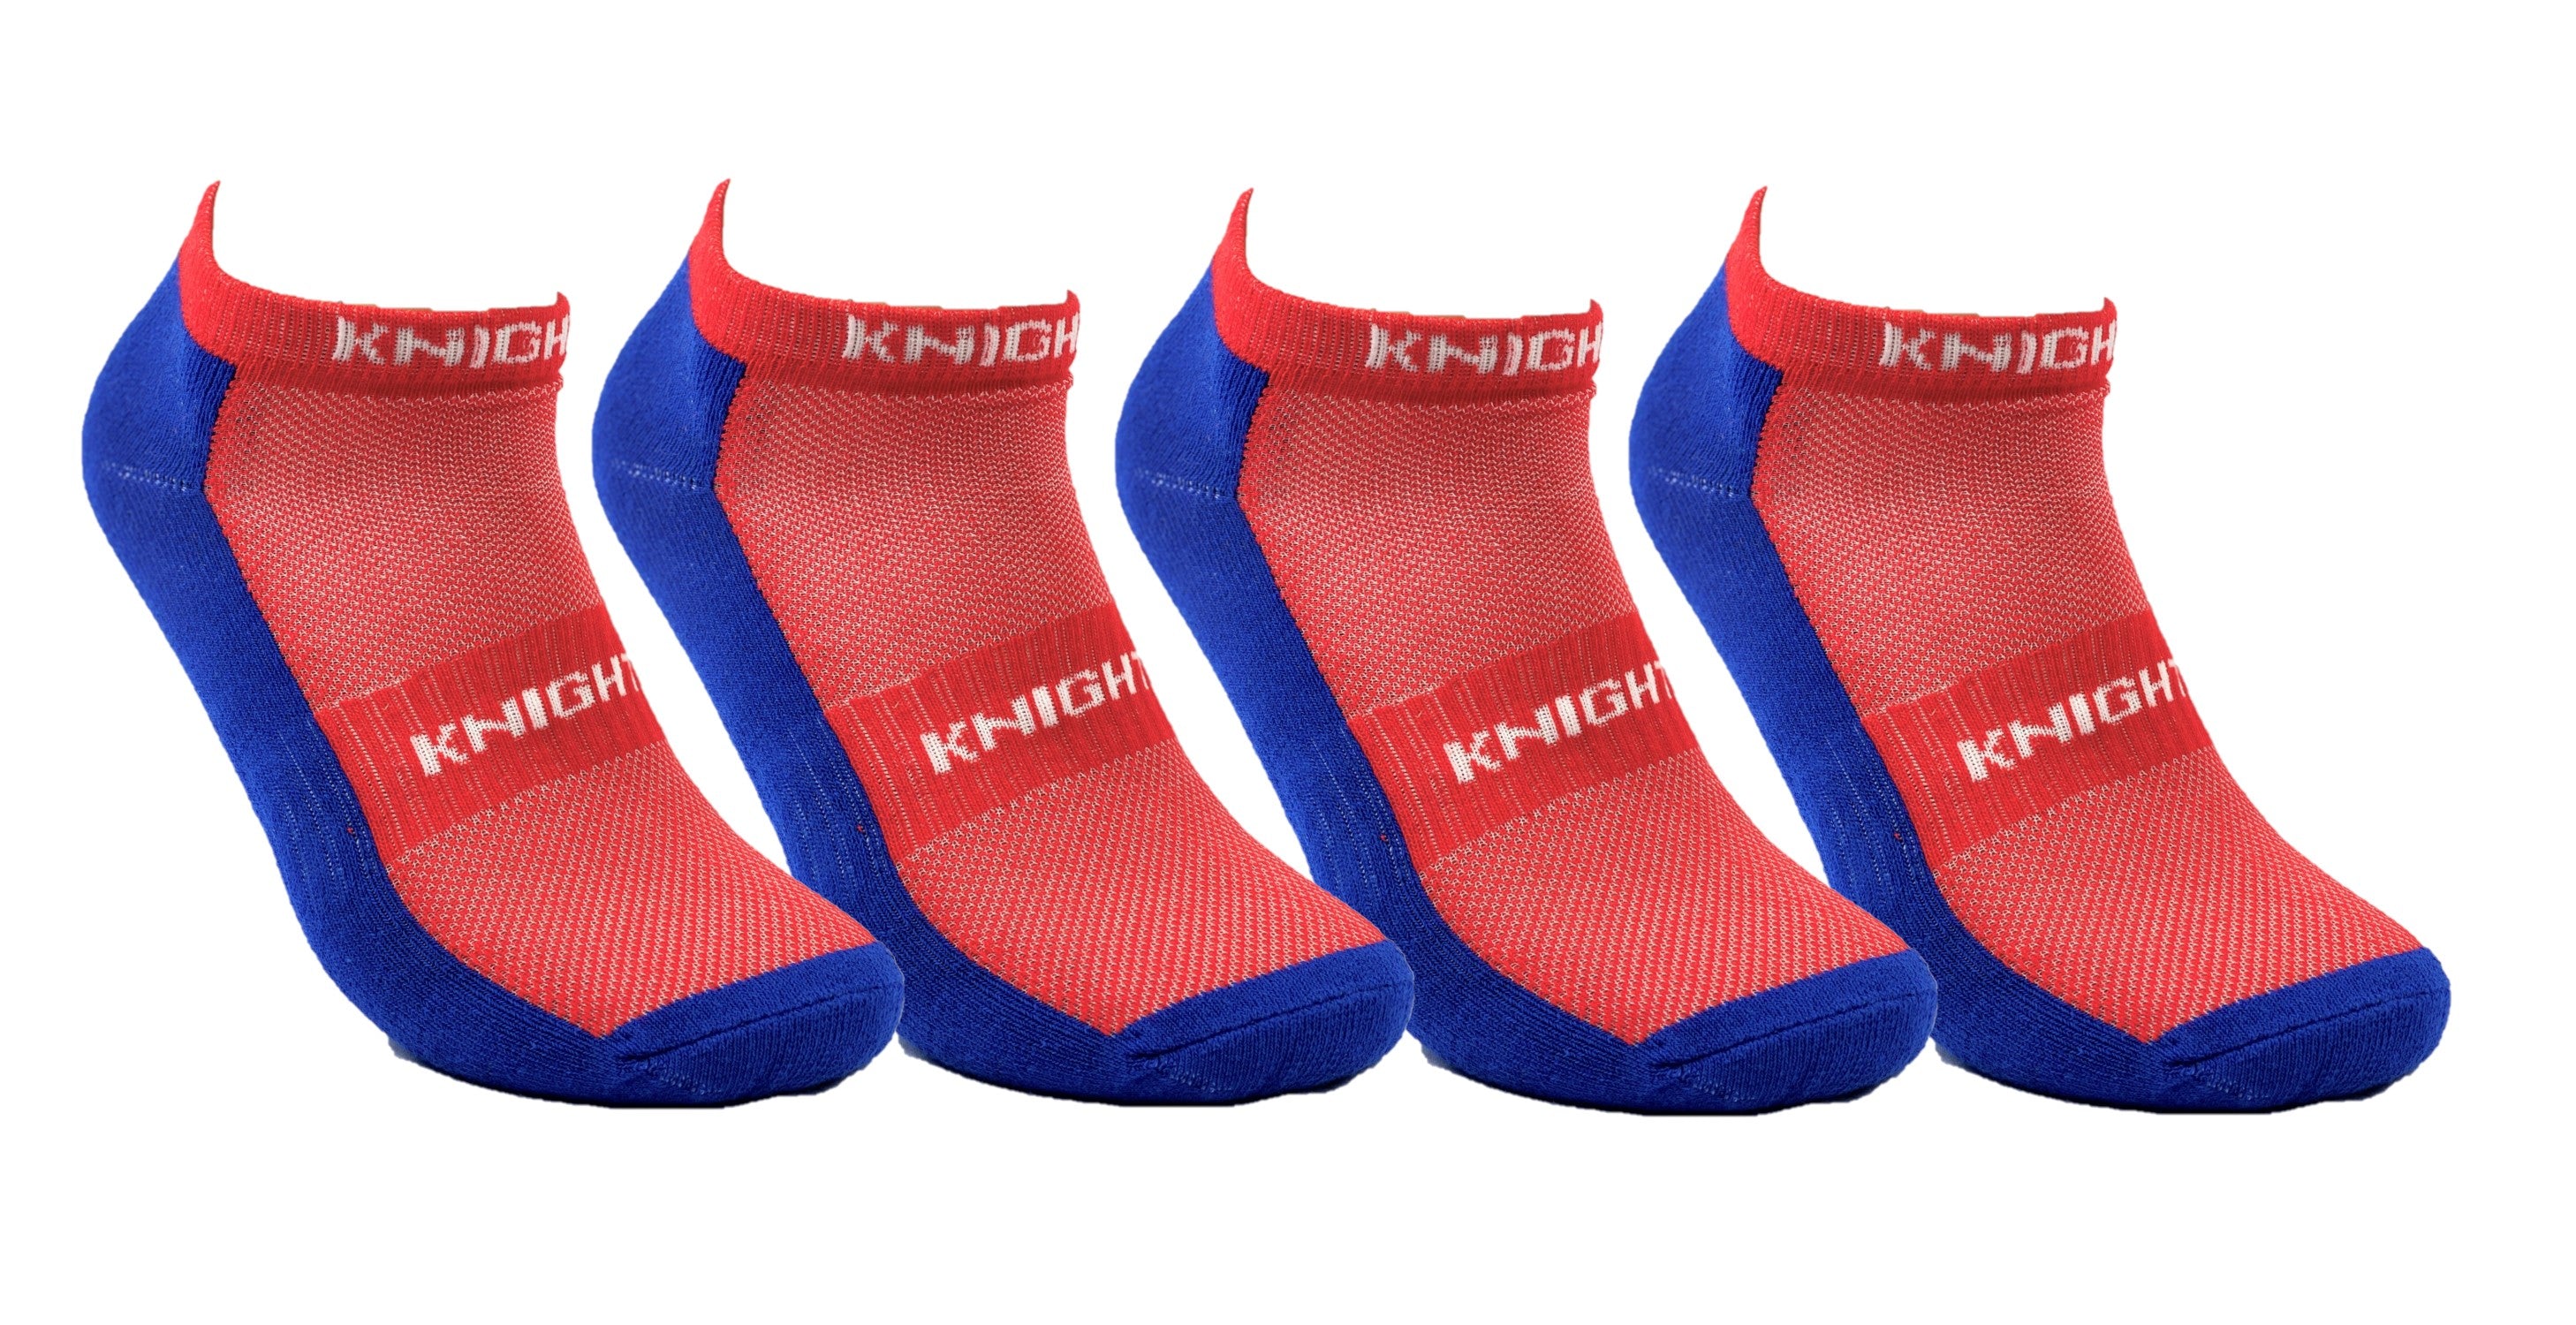 NRL Newcastle Knights 4 Pairs High Performance Ankle Sports Socks